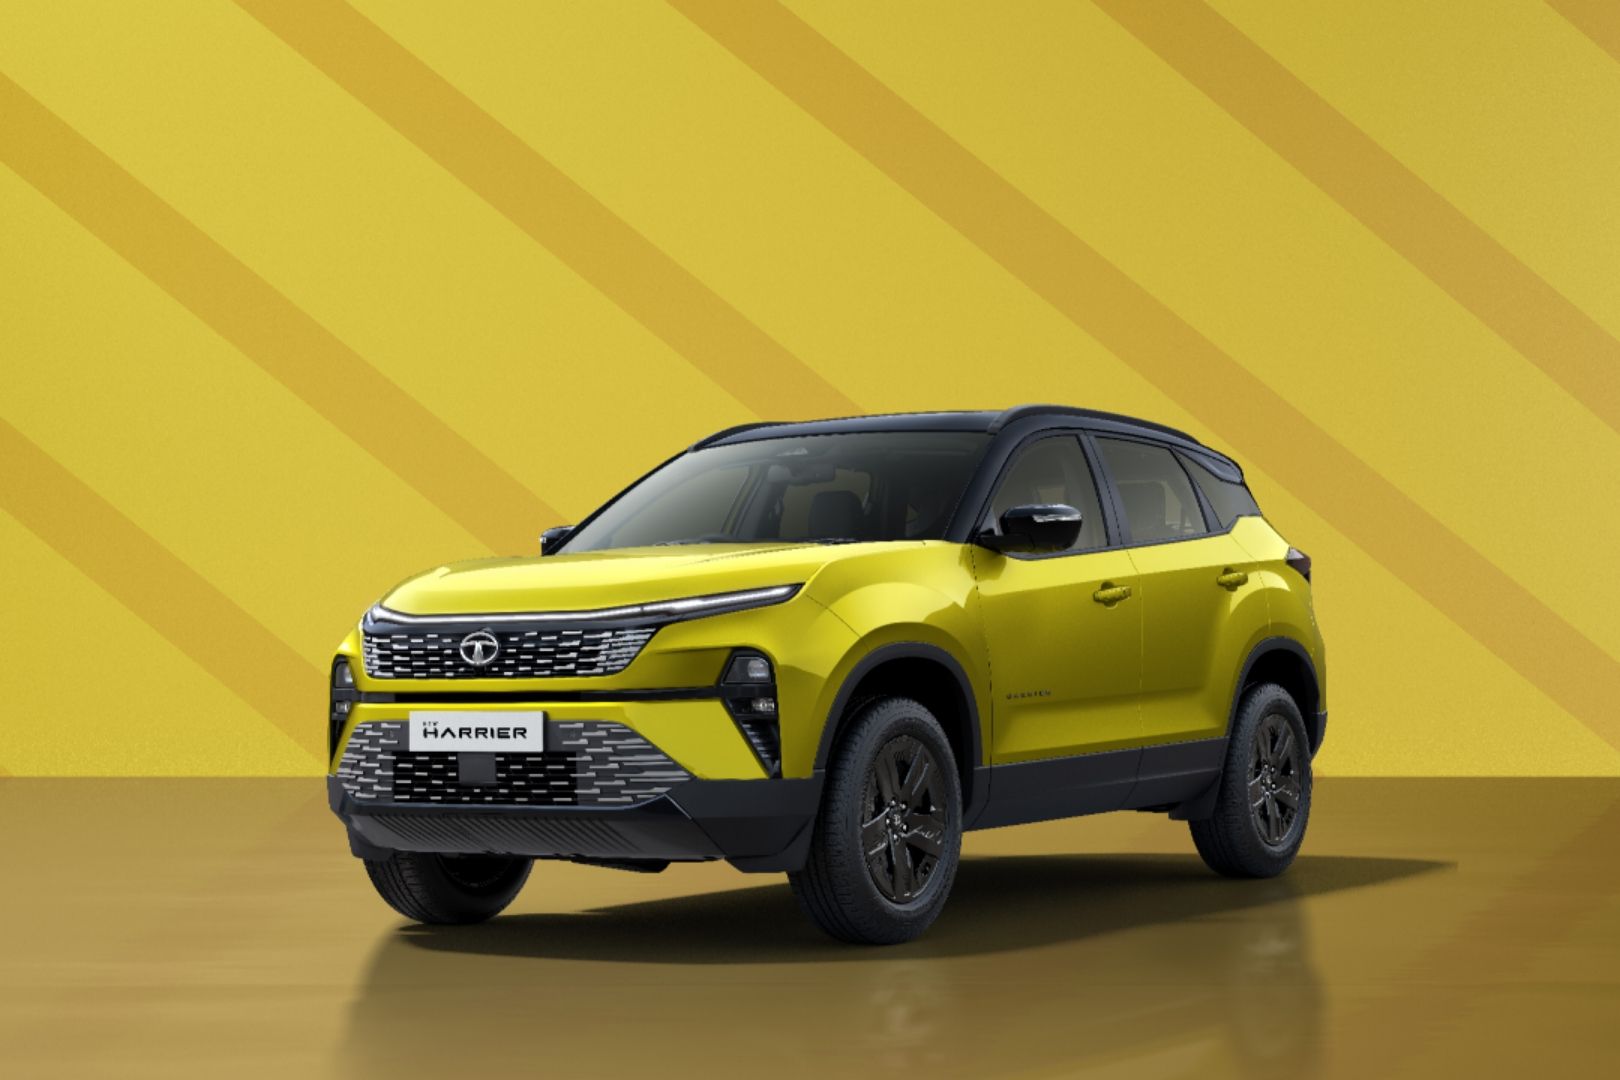 2023 Tata Harrier Variant-wise Features Detailed